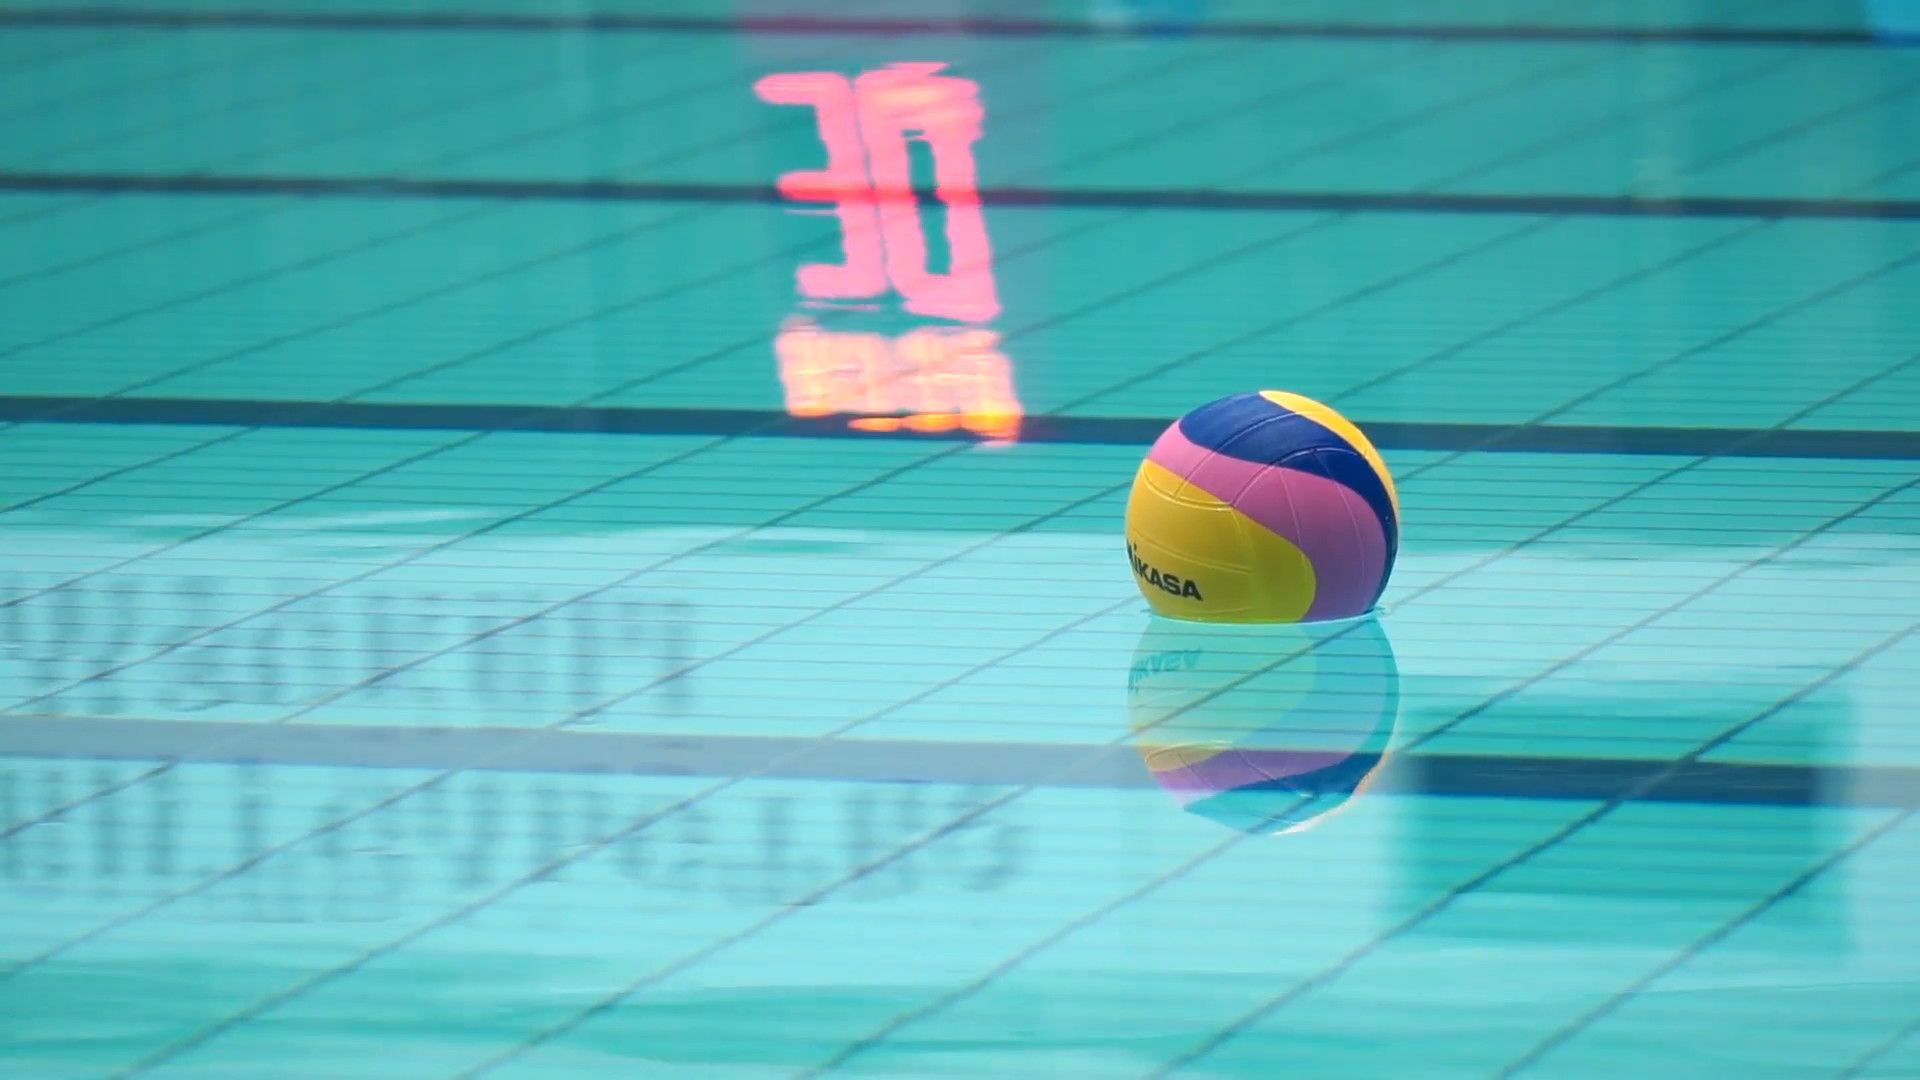 Water Polo: A Mikasa swim sports ball, Equipment for competitions in swimming pools. 1920x1080 Full HD Wallpaper.